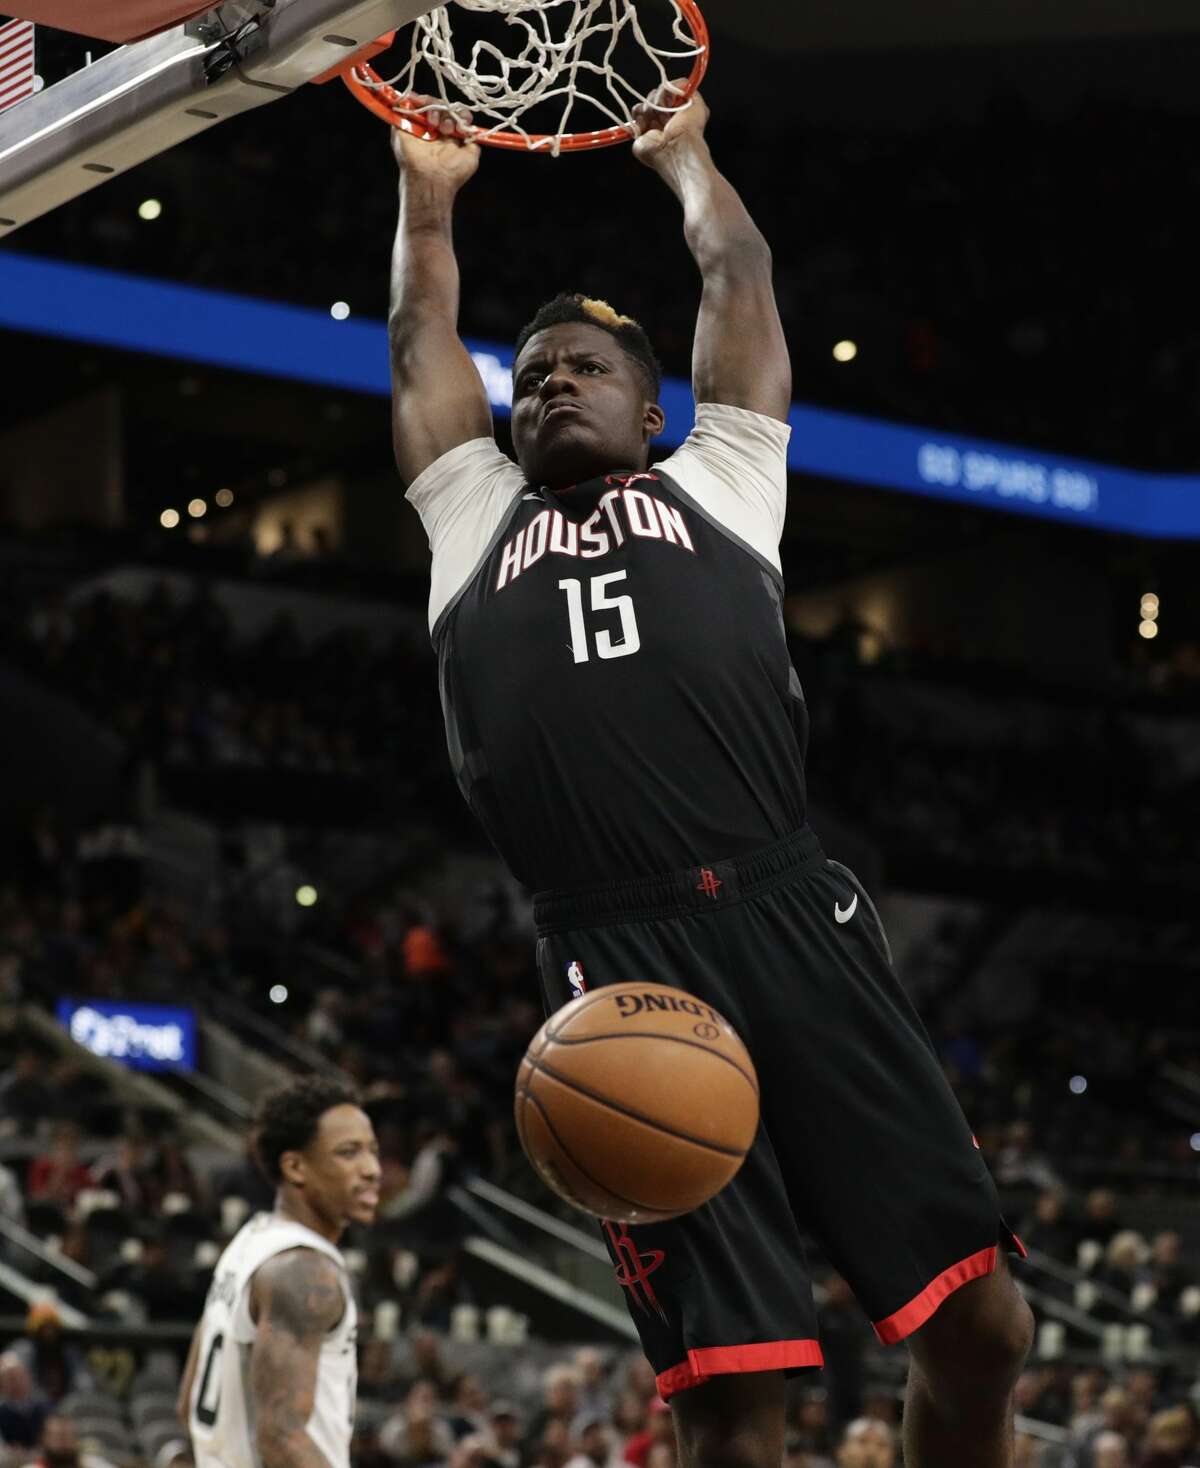 Houston Rockets center Clint Capela scores against the San Antonio Spurs during the first half of an NBA basketball game in San Antonio, Tuesday, Dec. 3, 2019. (AP Photo/Eric Gay)